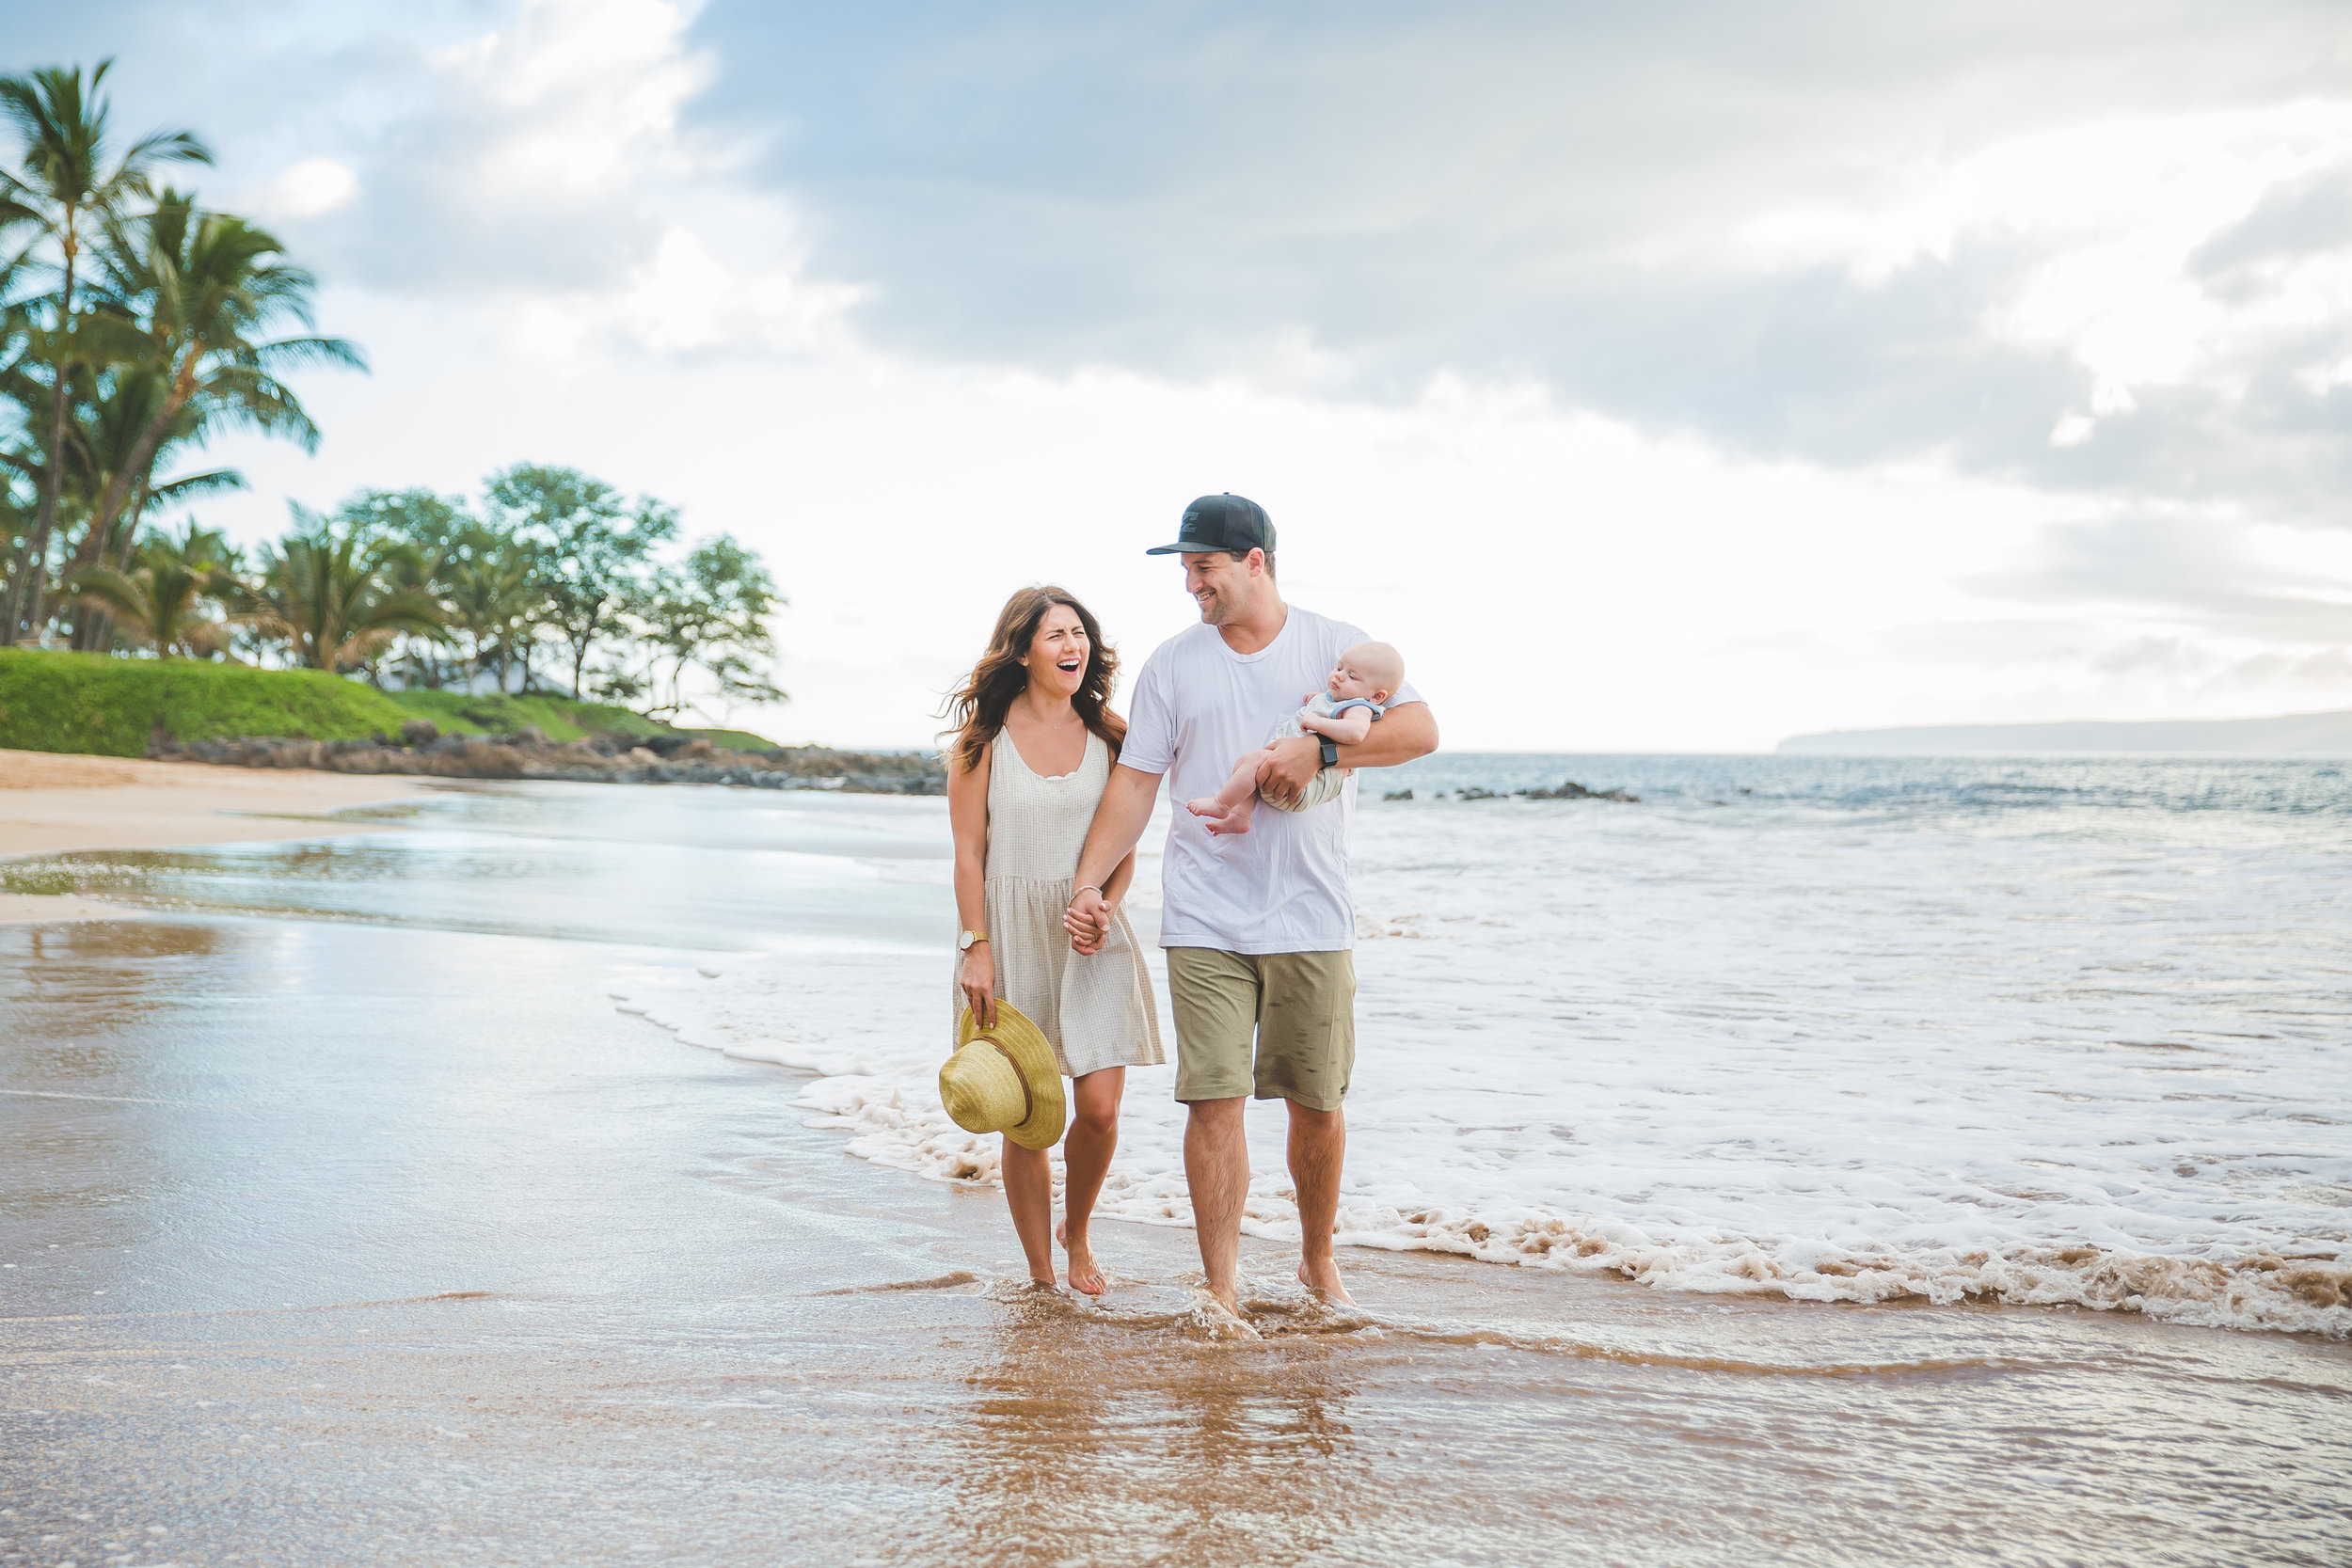 Jillian Harris Booked Flytographer in Maui and LOVED IT!